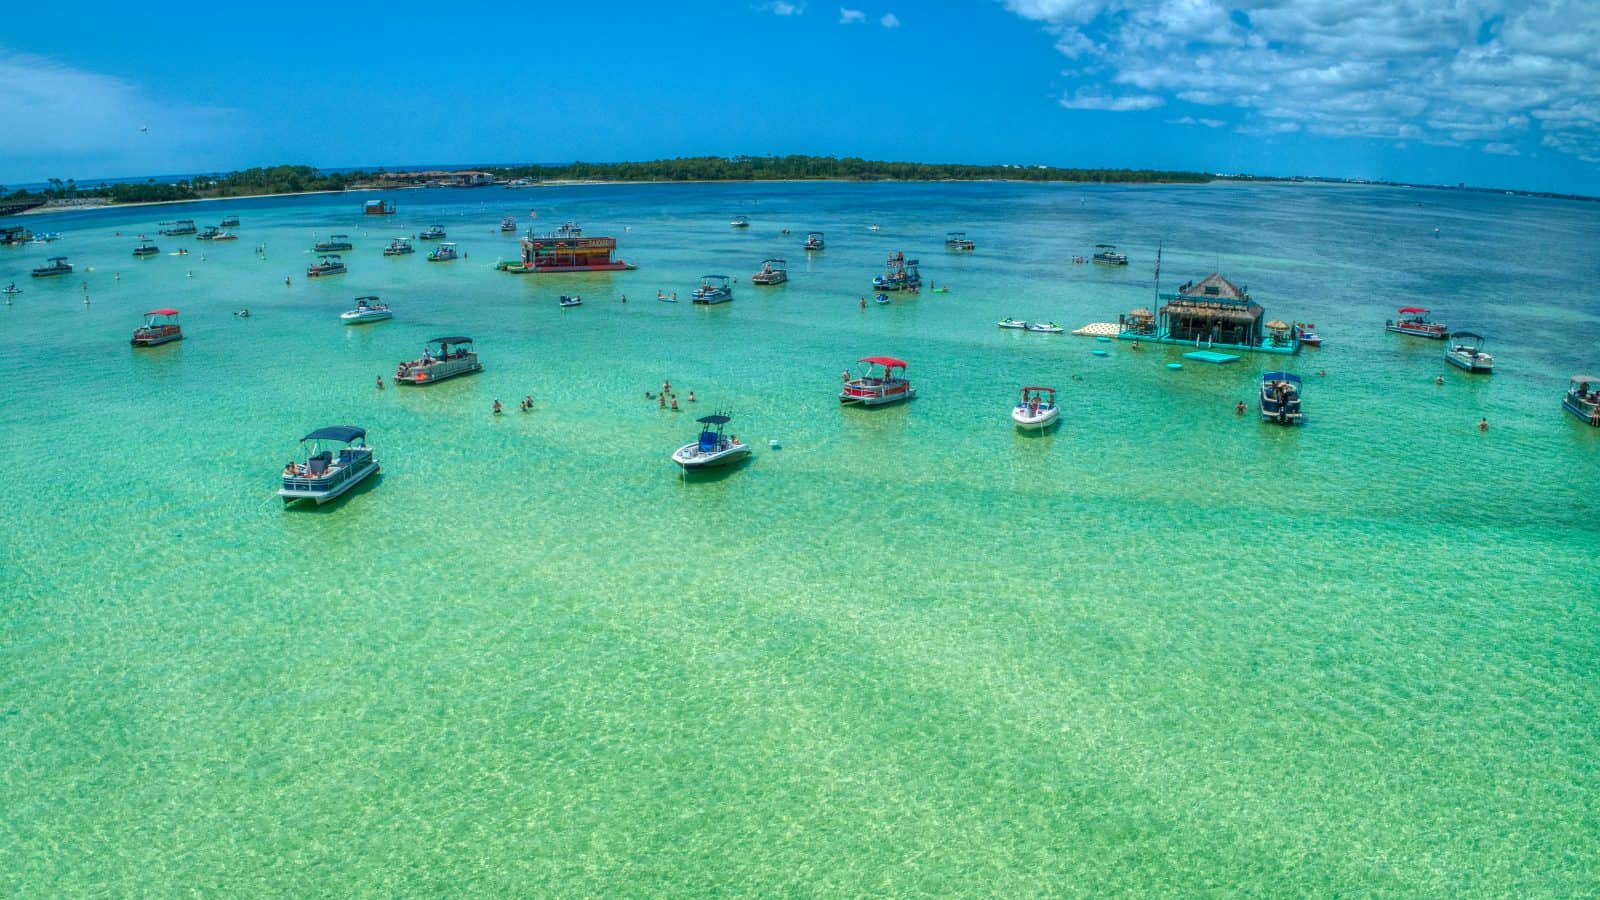 The clear blue-green waters of Crab Island, Florida glitter in the sunlight.